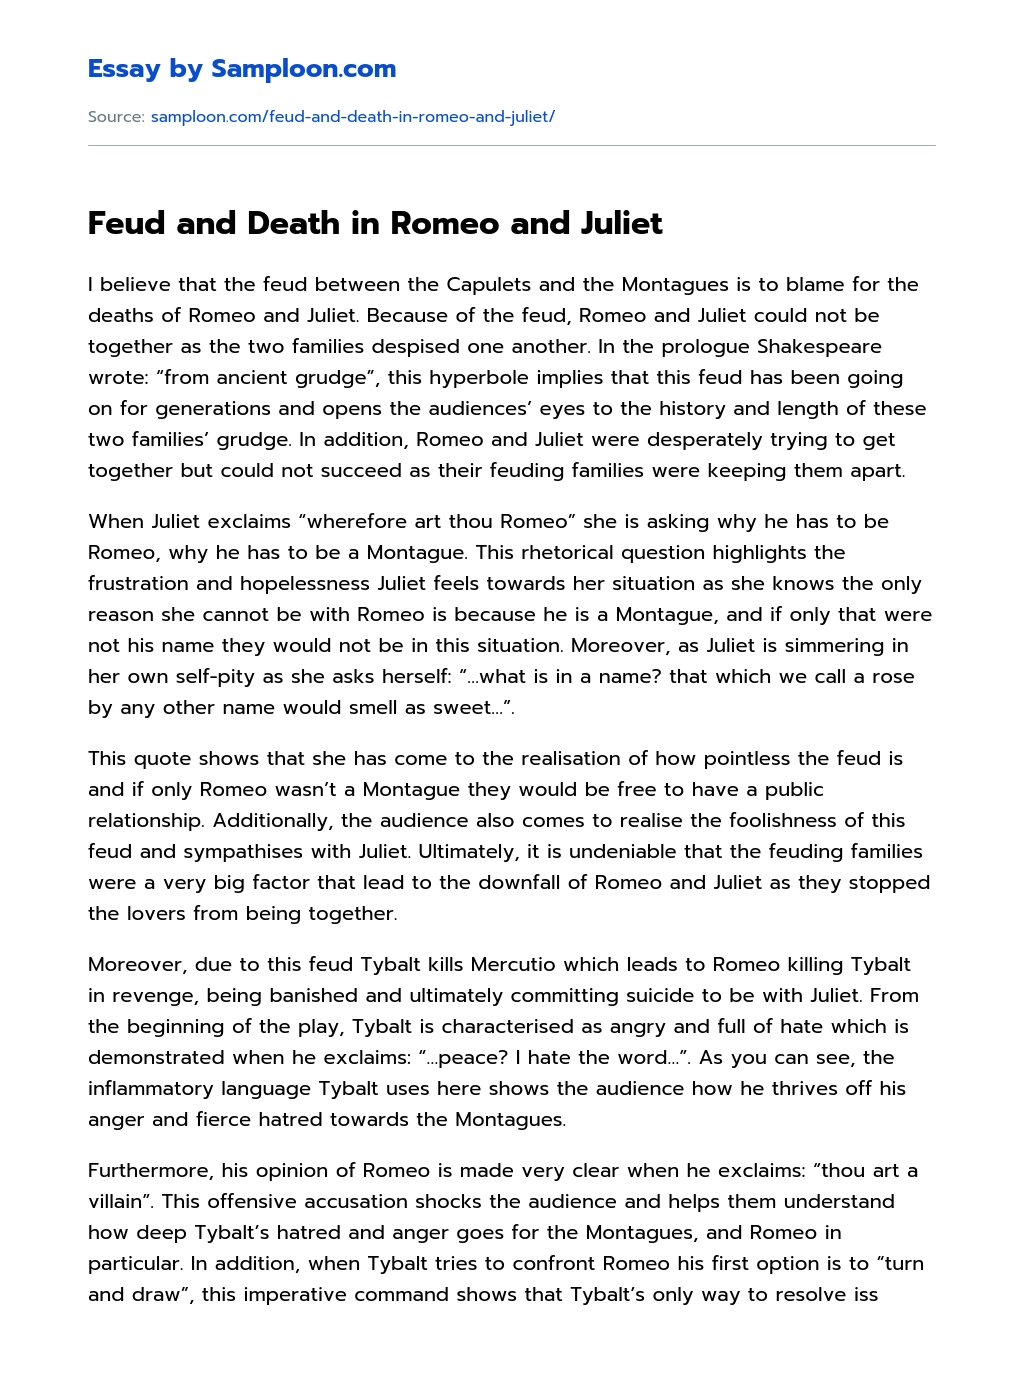 Feud and Death in Romeo and Juliet essay